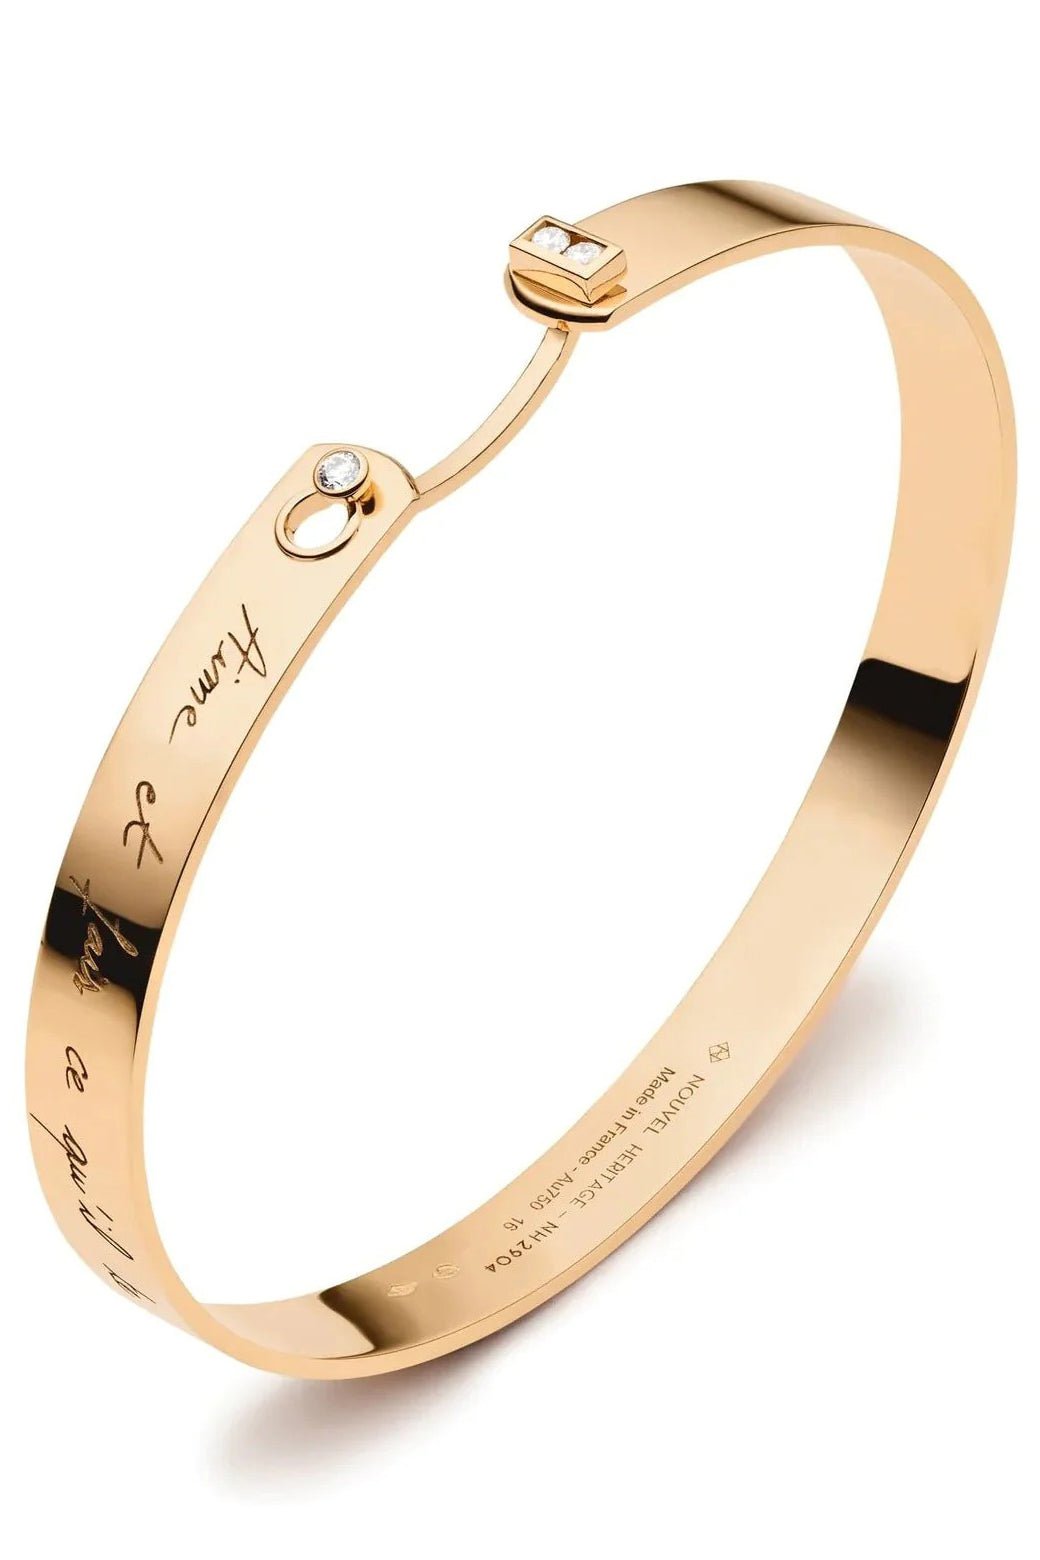 NOUVEL HERITAGE-Some Me Time Bangle-YELLOW GOLD